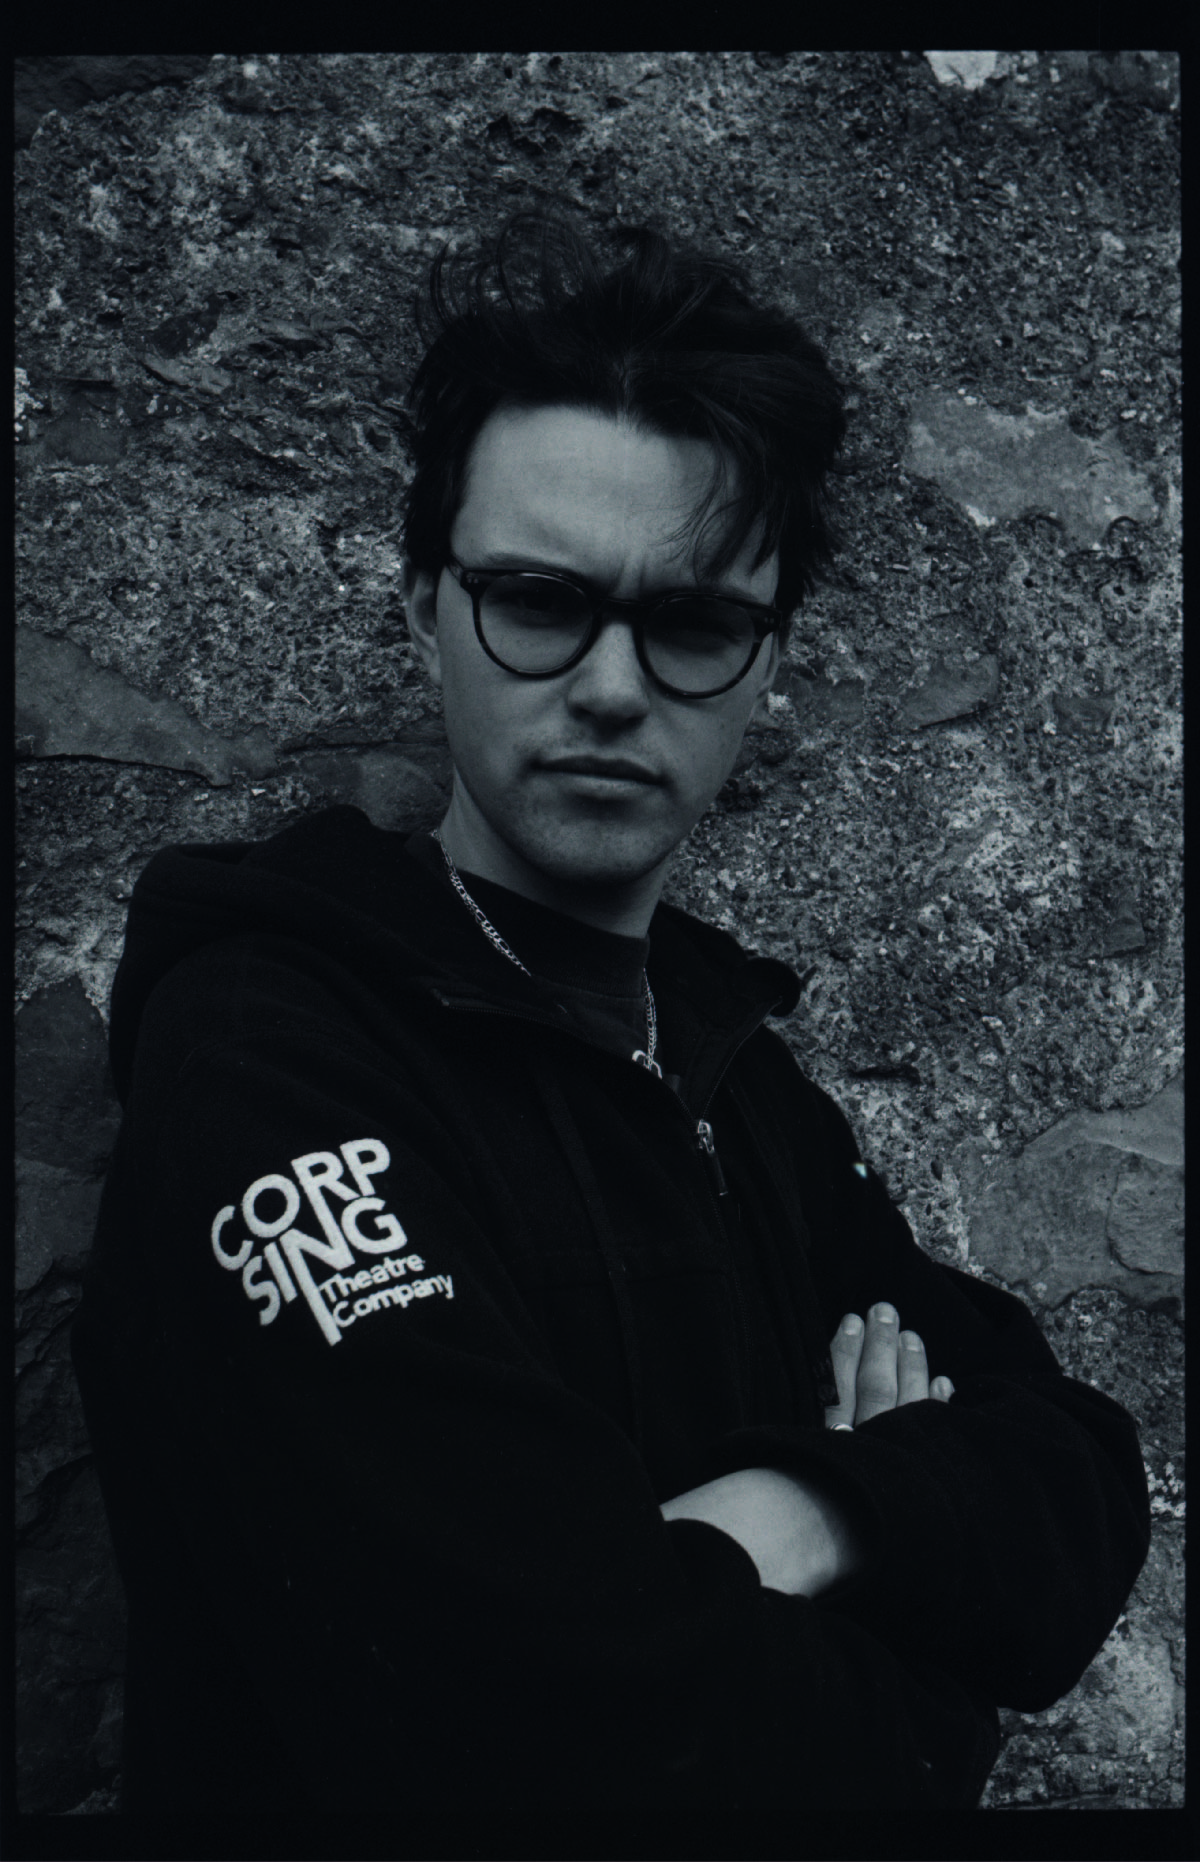 Greyscale photograph of the artist wearing a 'Corpsing theatre Company' branded Jumper.